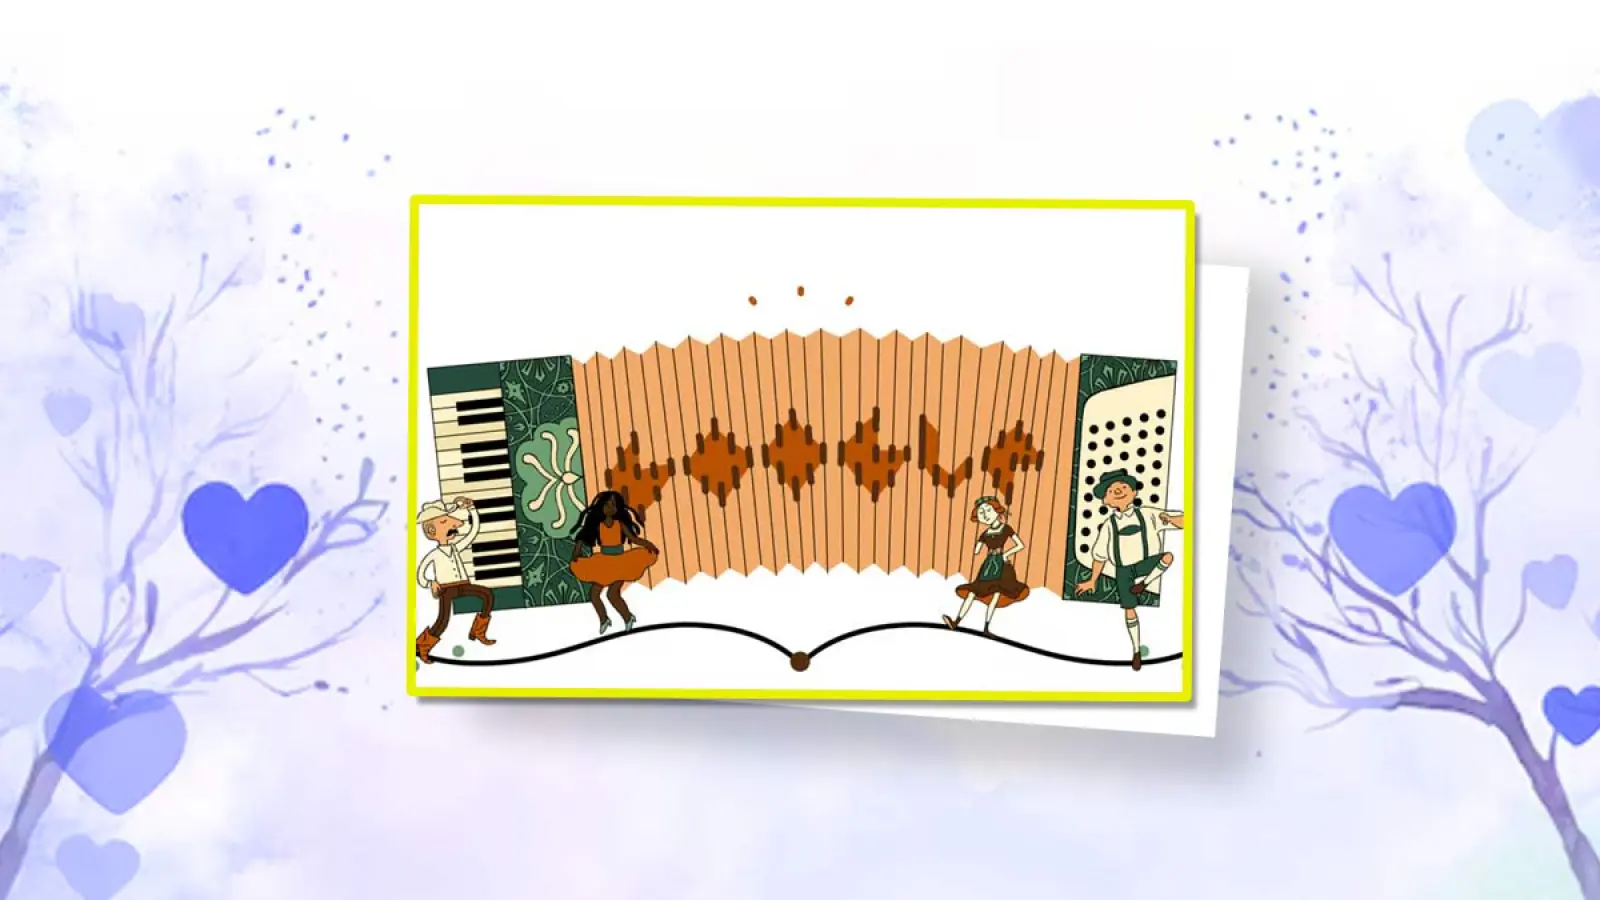 Google made a doodle on the anniversary of the 1829 patent of the accordion